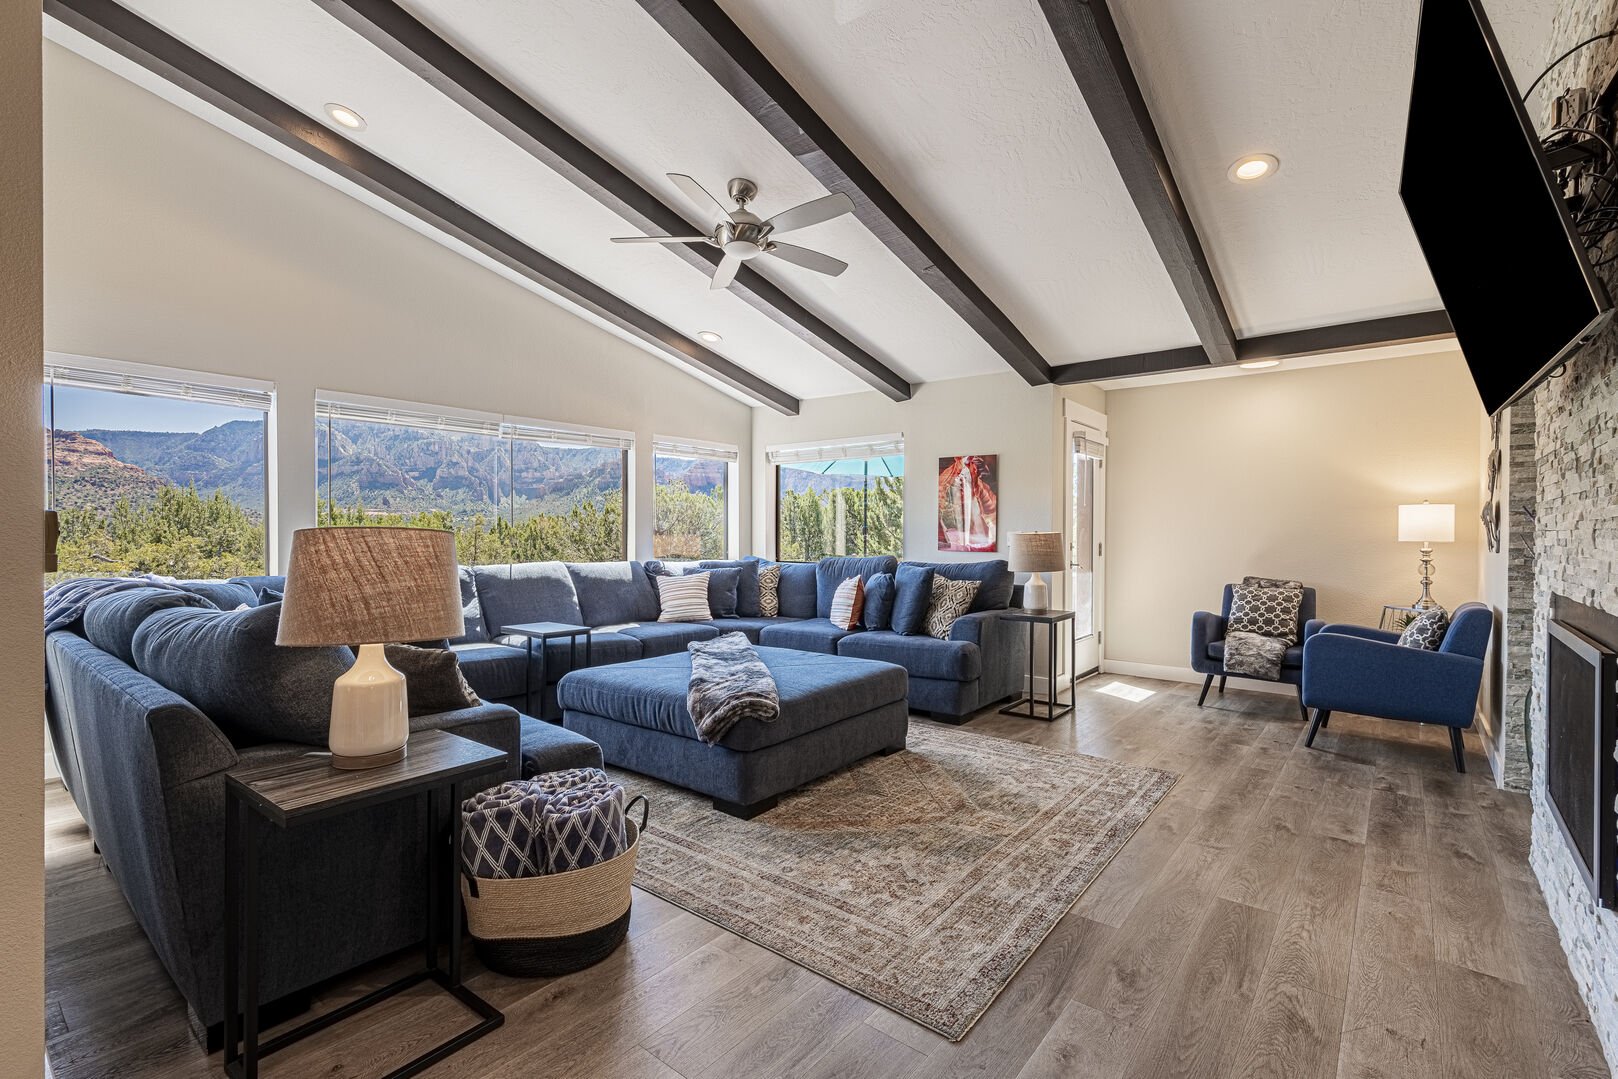 Spacious Living Room with a Large Sectional Sofa and Big Picture Windows to Enjoy the Amazing Sedona Red Rock Views